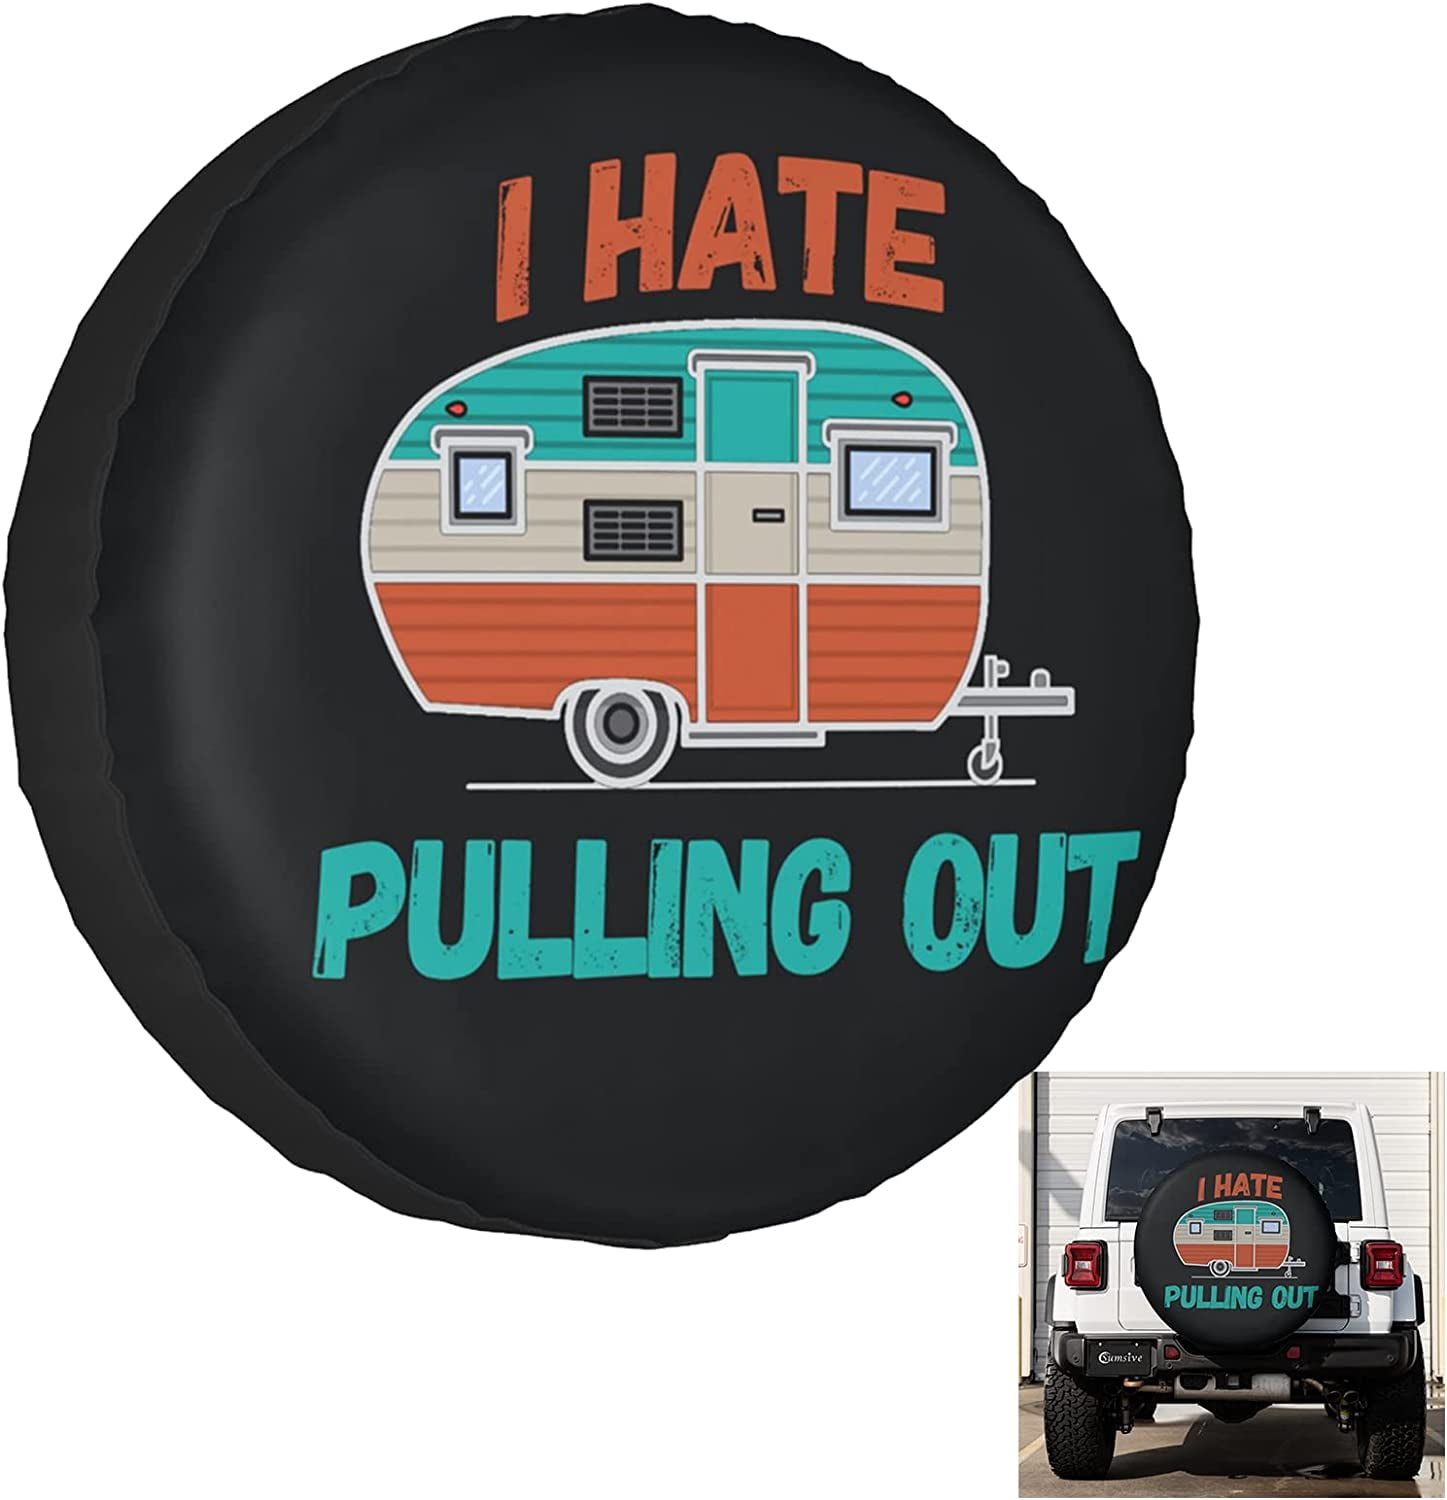 I Hate Pulling Out Spare Tire Cover Wheel Covers for RV Tires Camper Tire  Cover Protectors for Trailer Rv SUV Truck Travel Trailer